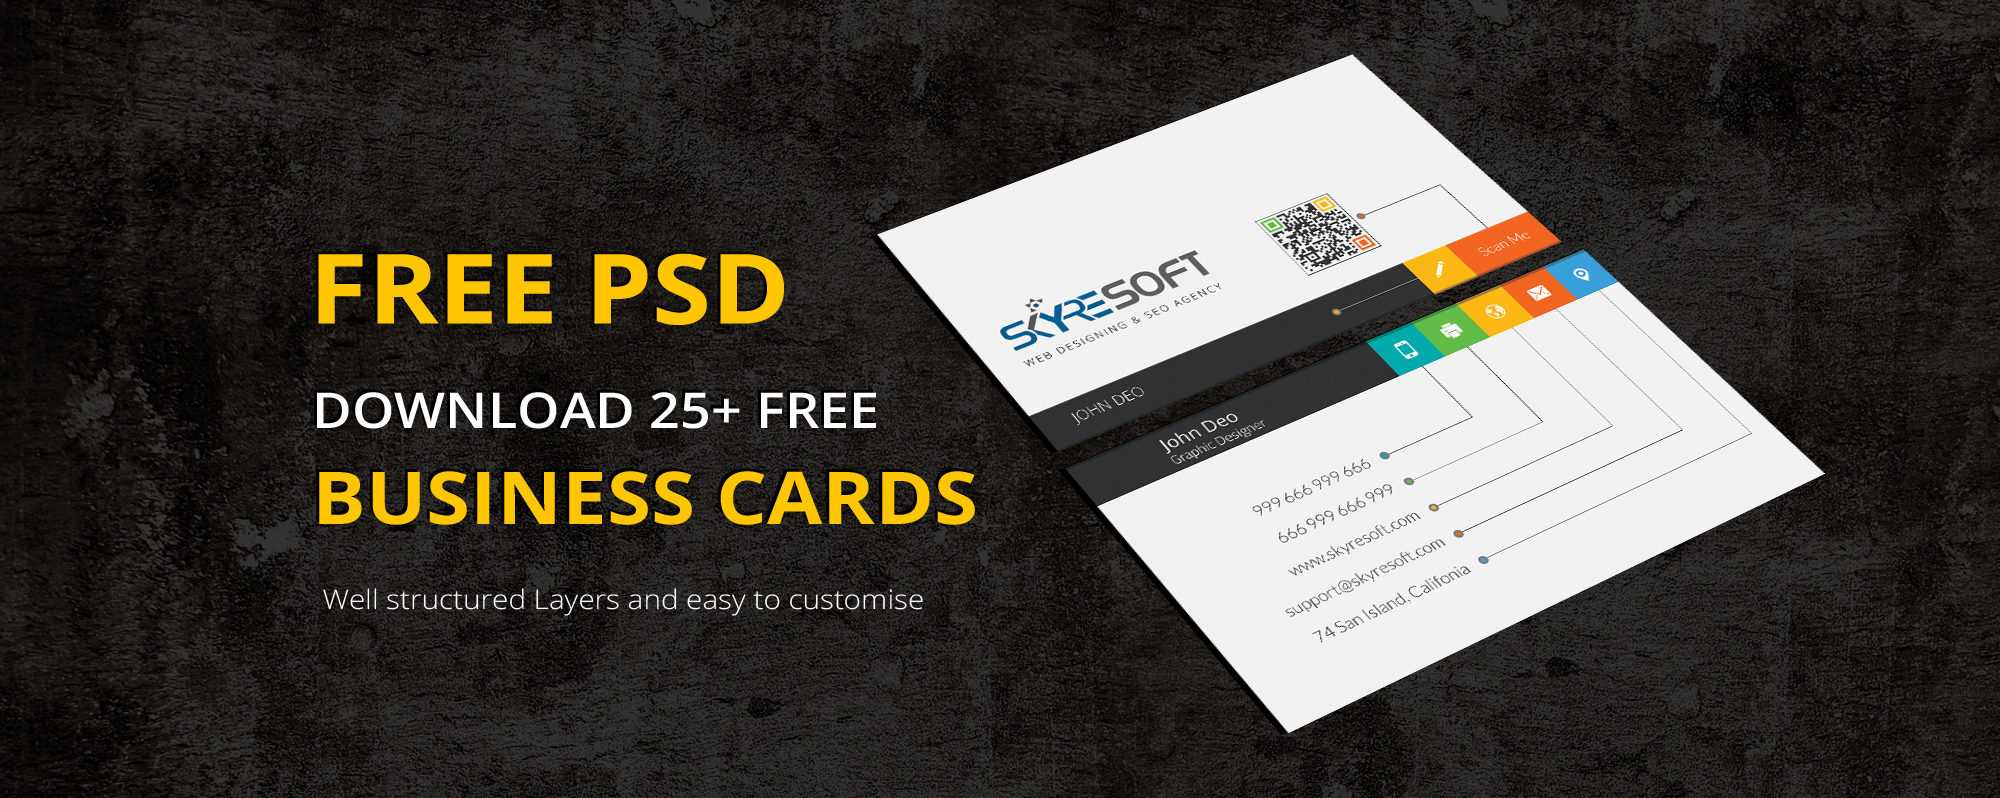 25 Creative Free Psd Business Card Templates 2019 In Web Design Business Cards Templates